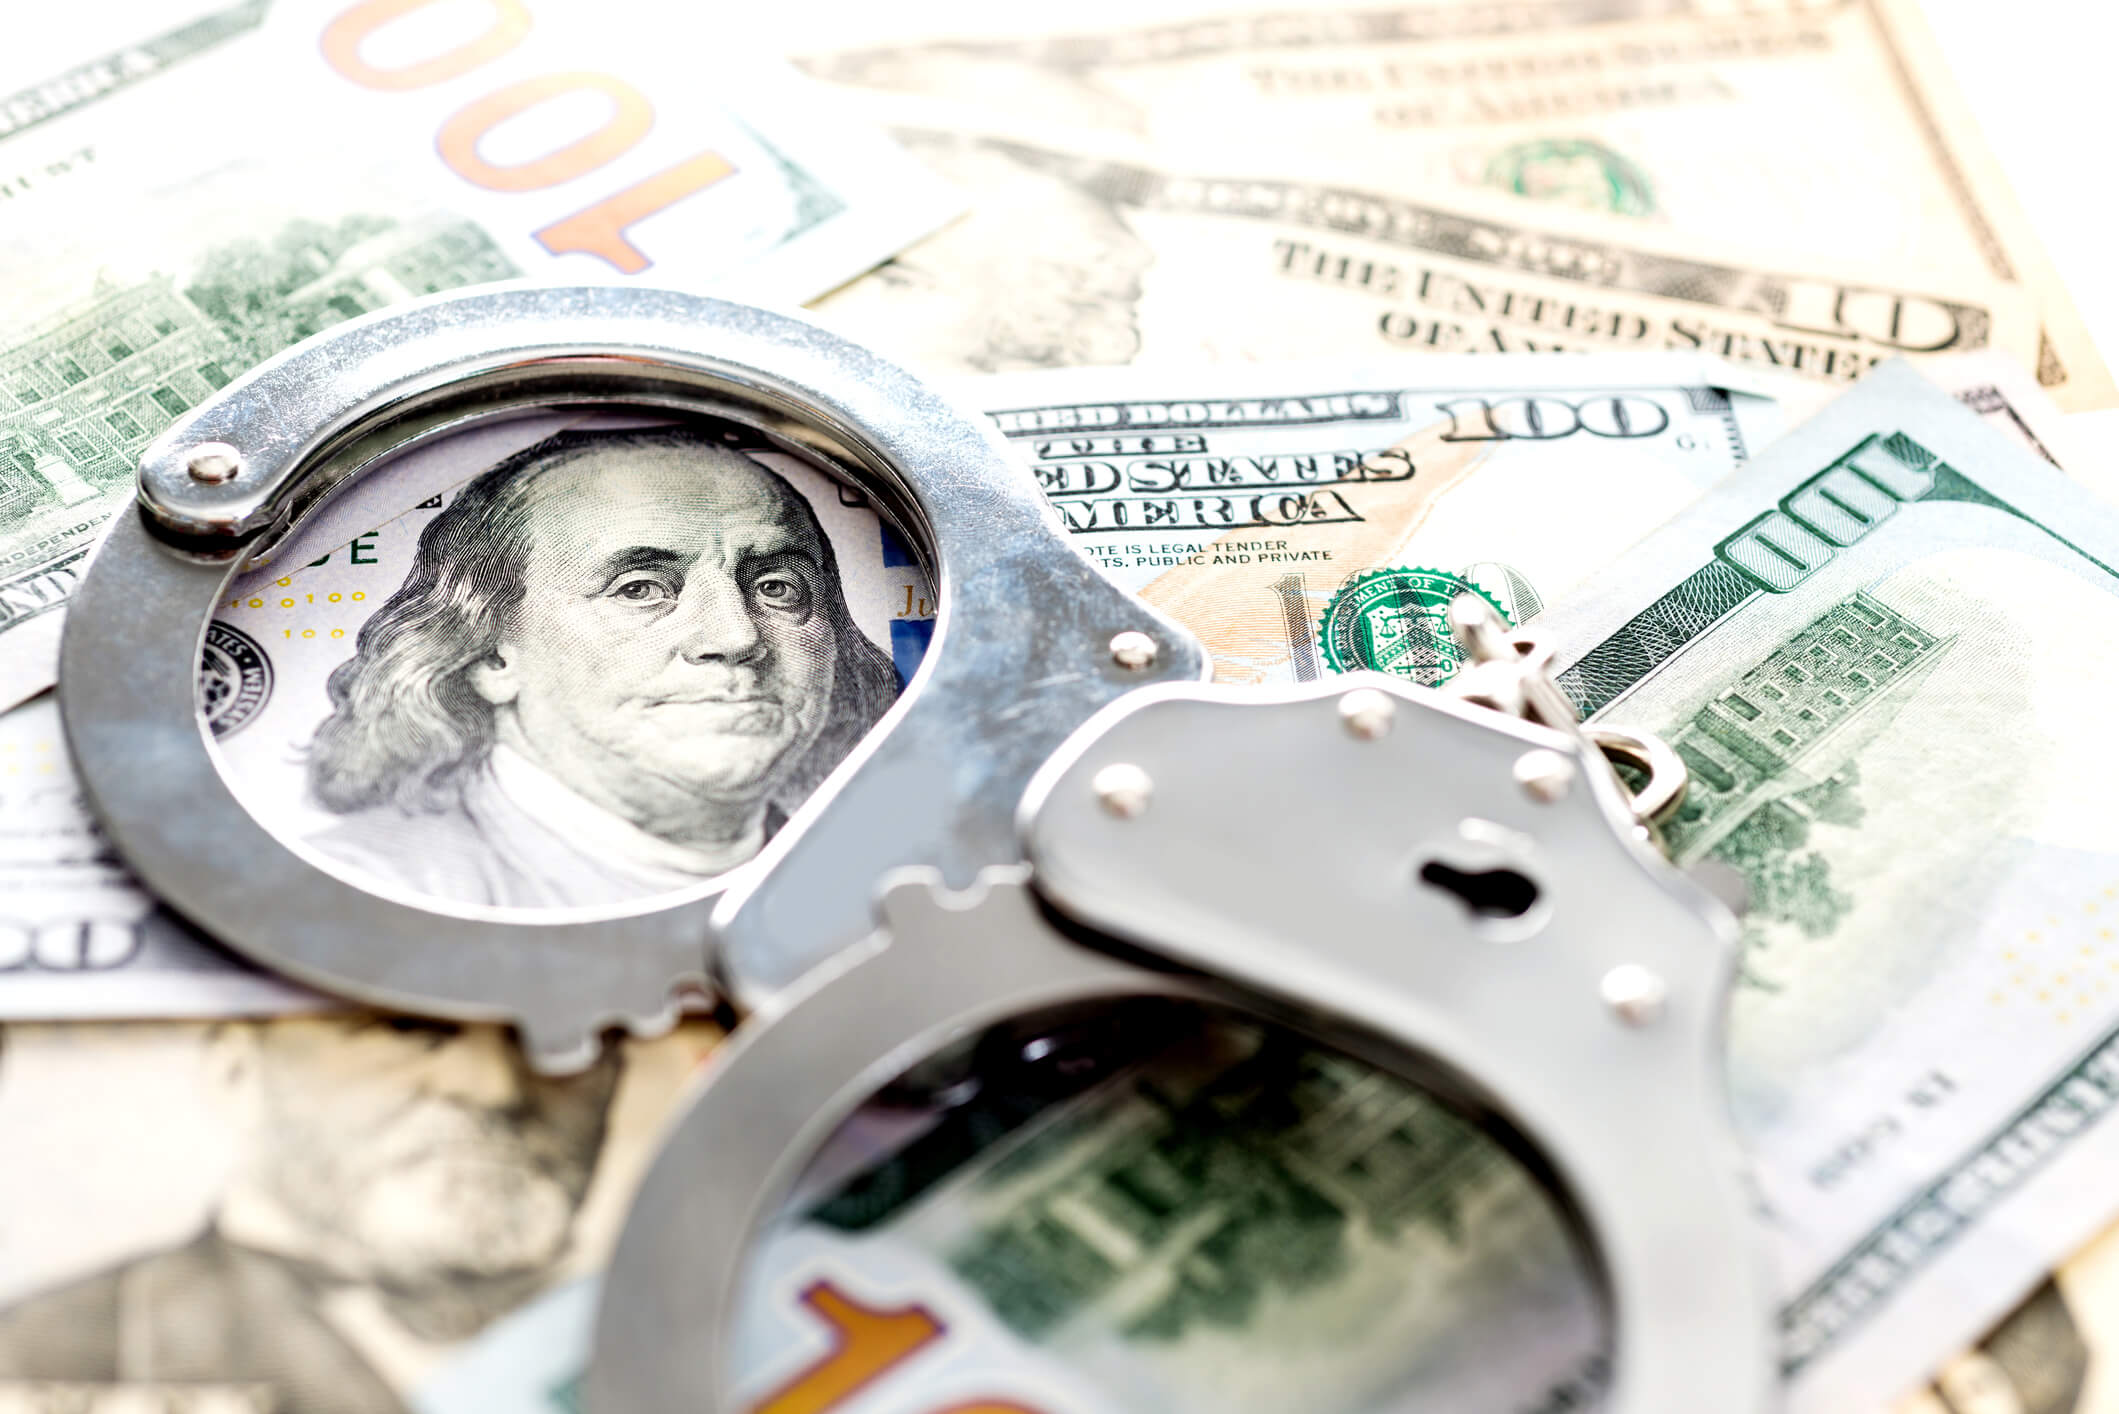 Handcuffs laying on top of a pile of money, a concept of grand larceny.